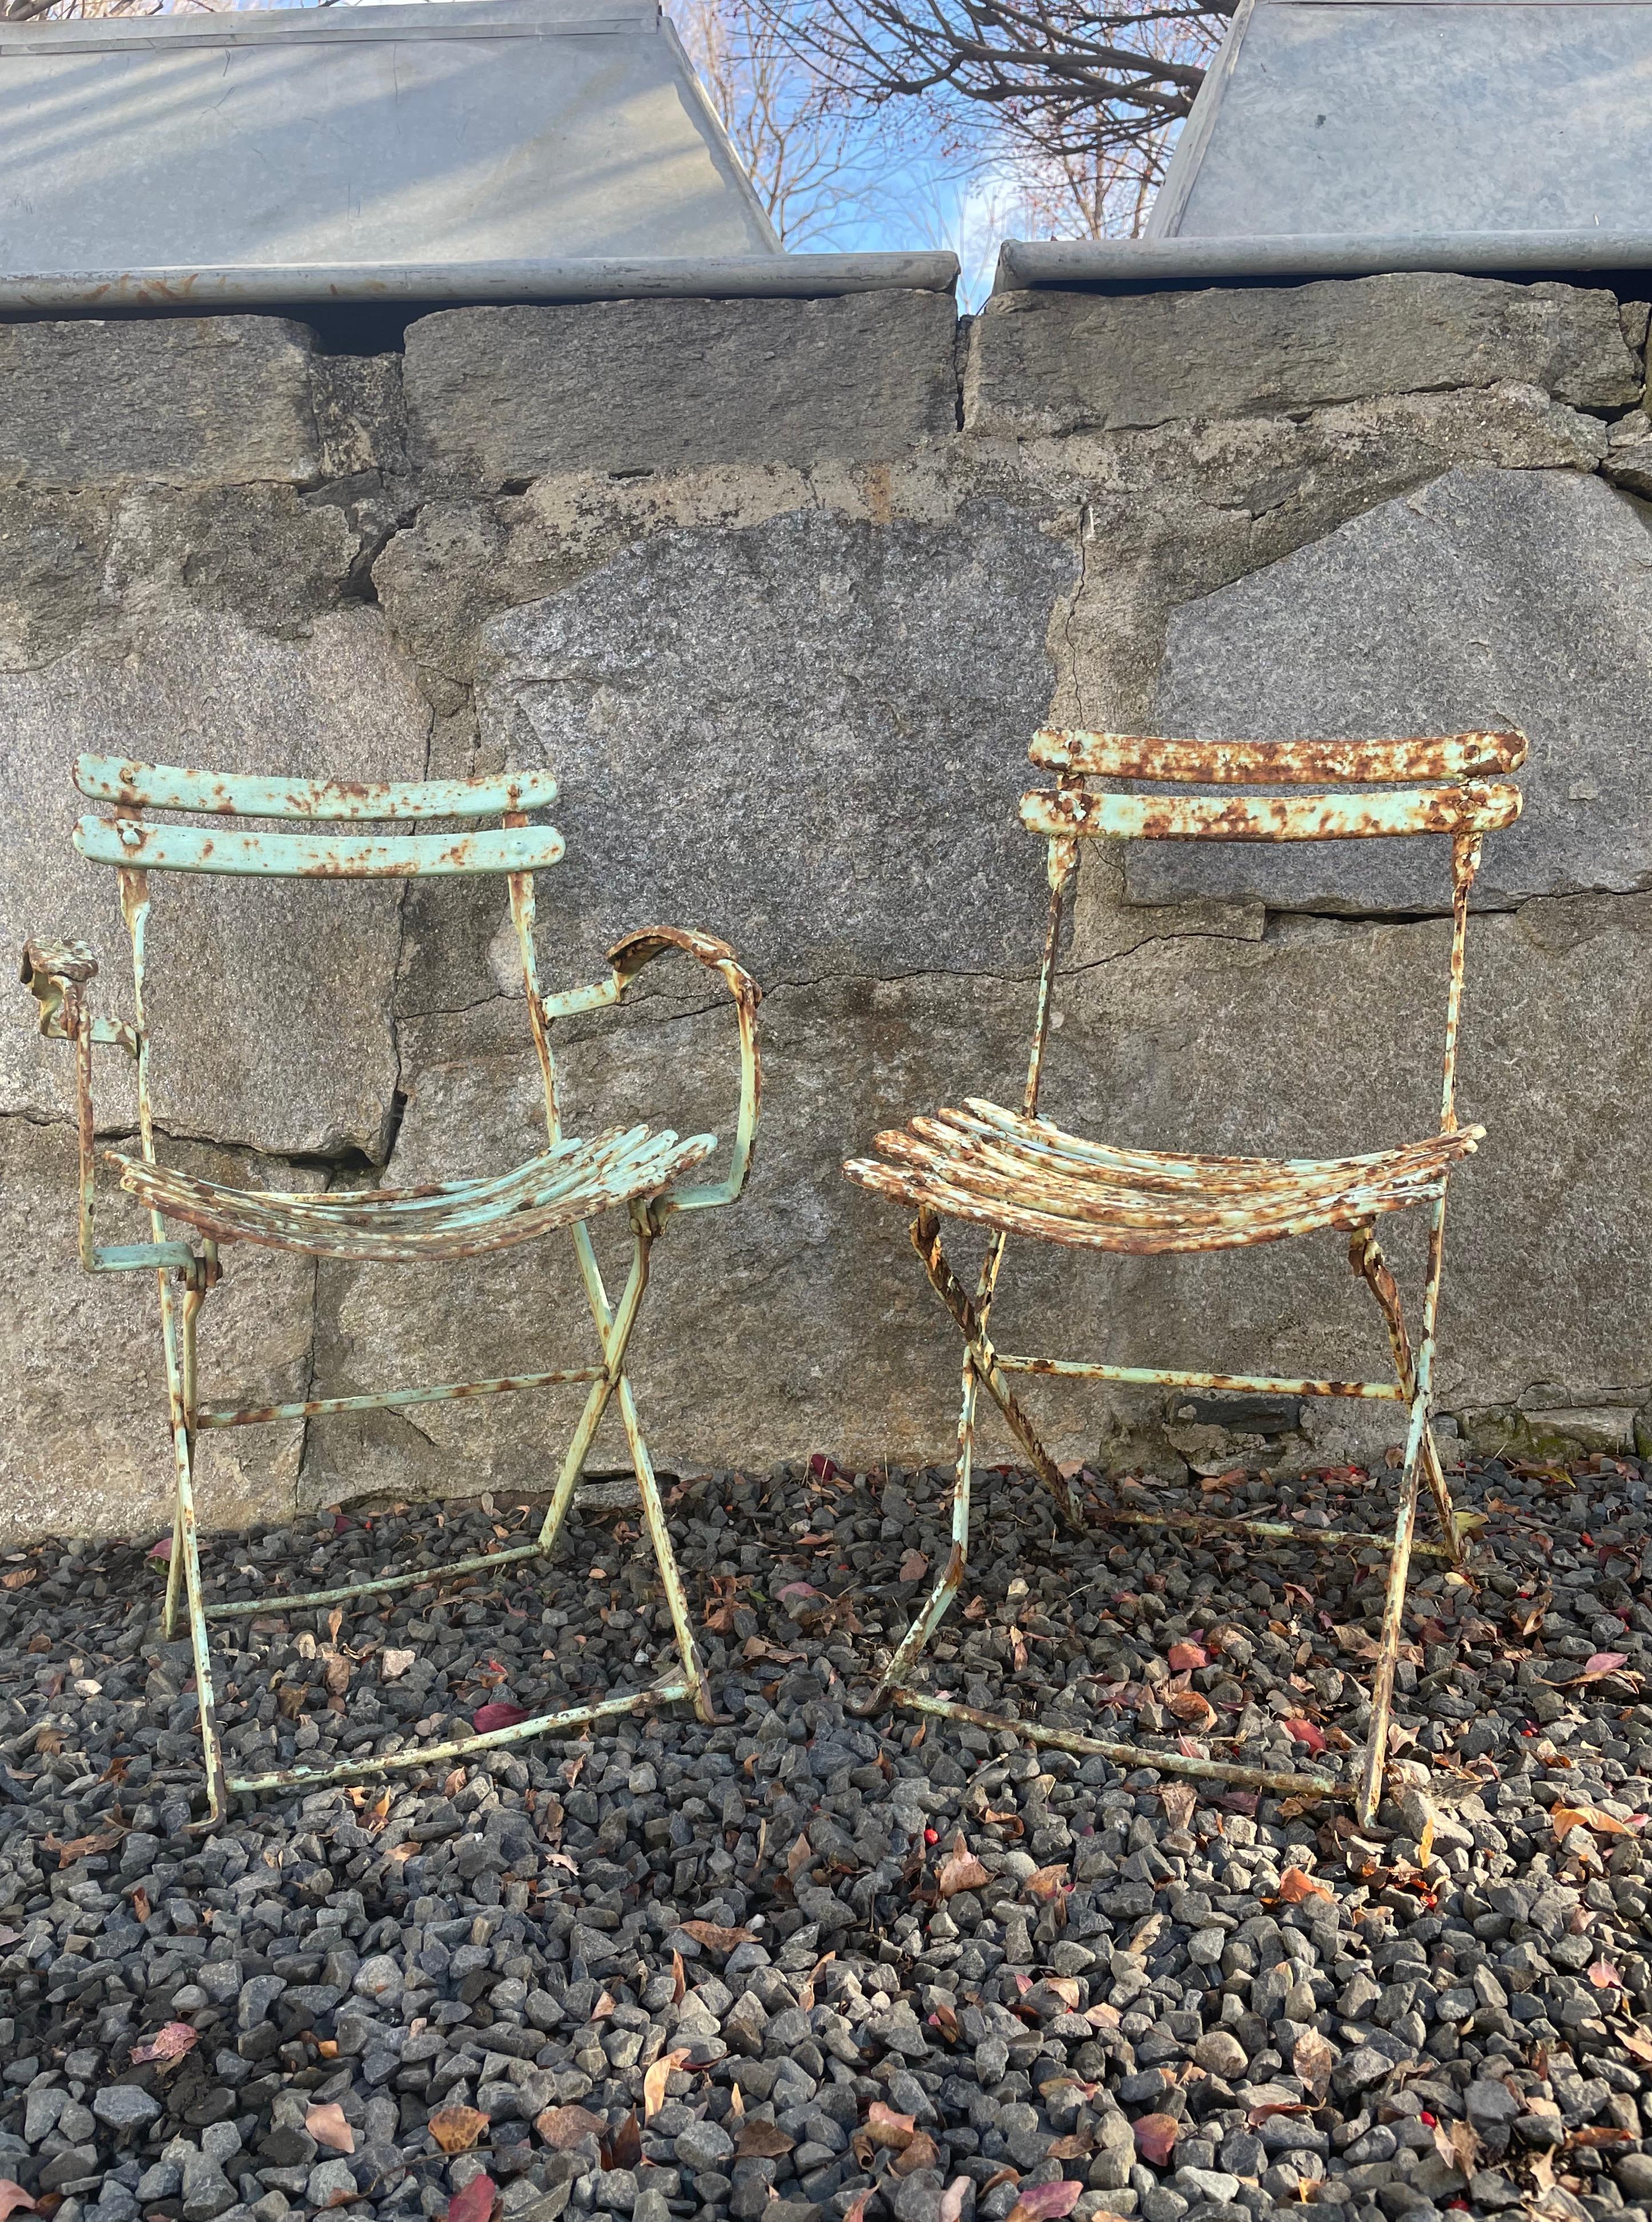 We have had this model of garden chairs before, but have never seen them in a children’s size. Constructed of wrought iron and sporting a beautiful weathered painted patina with pale blue-green paint and a moderate amount of surface rusting, they